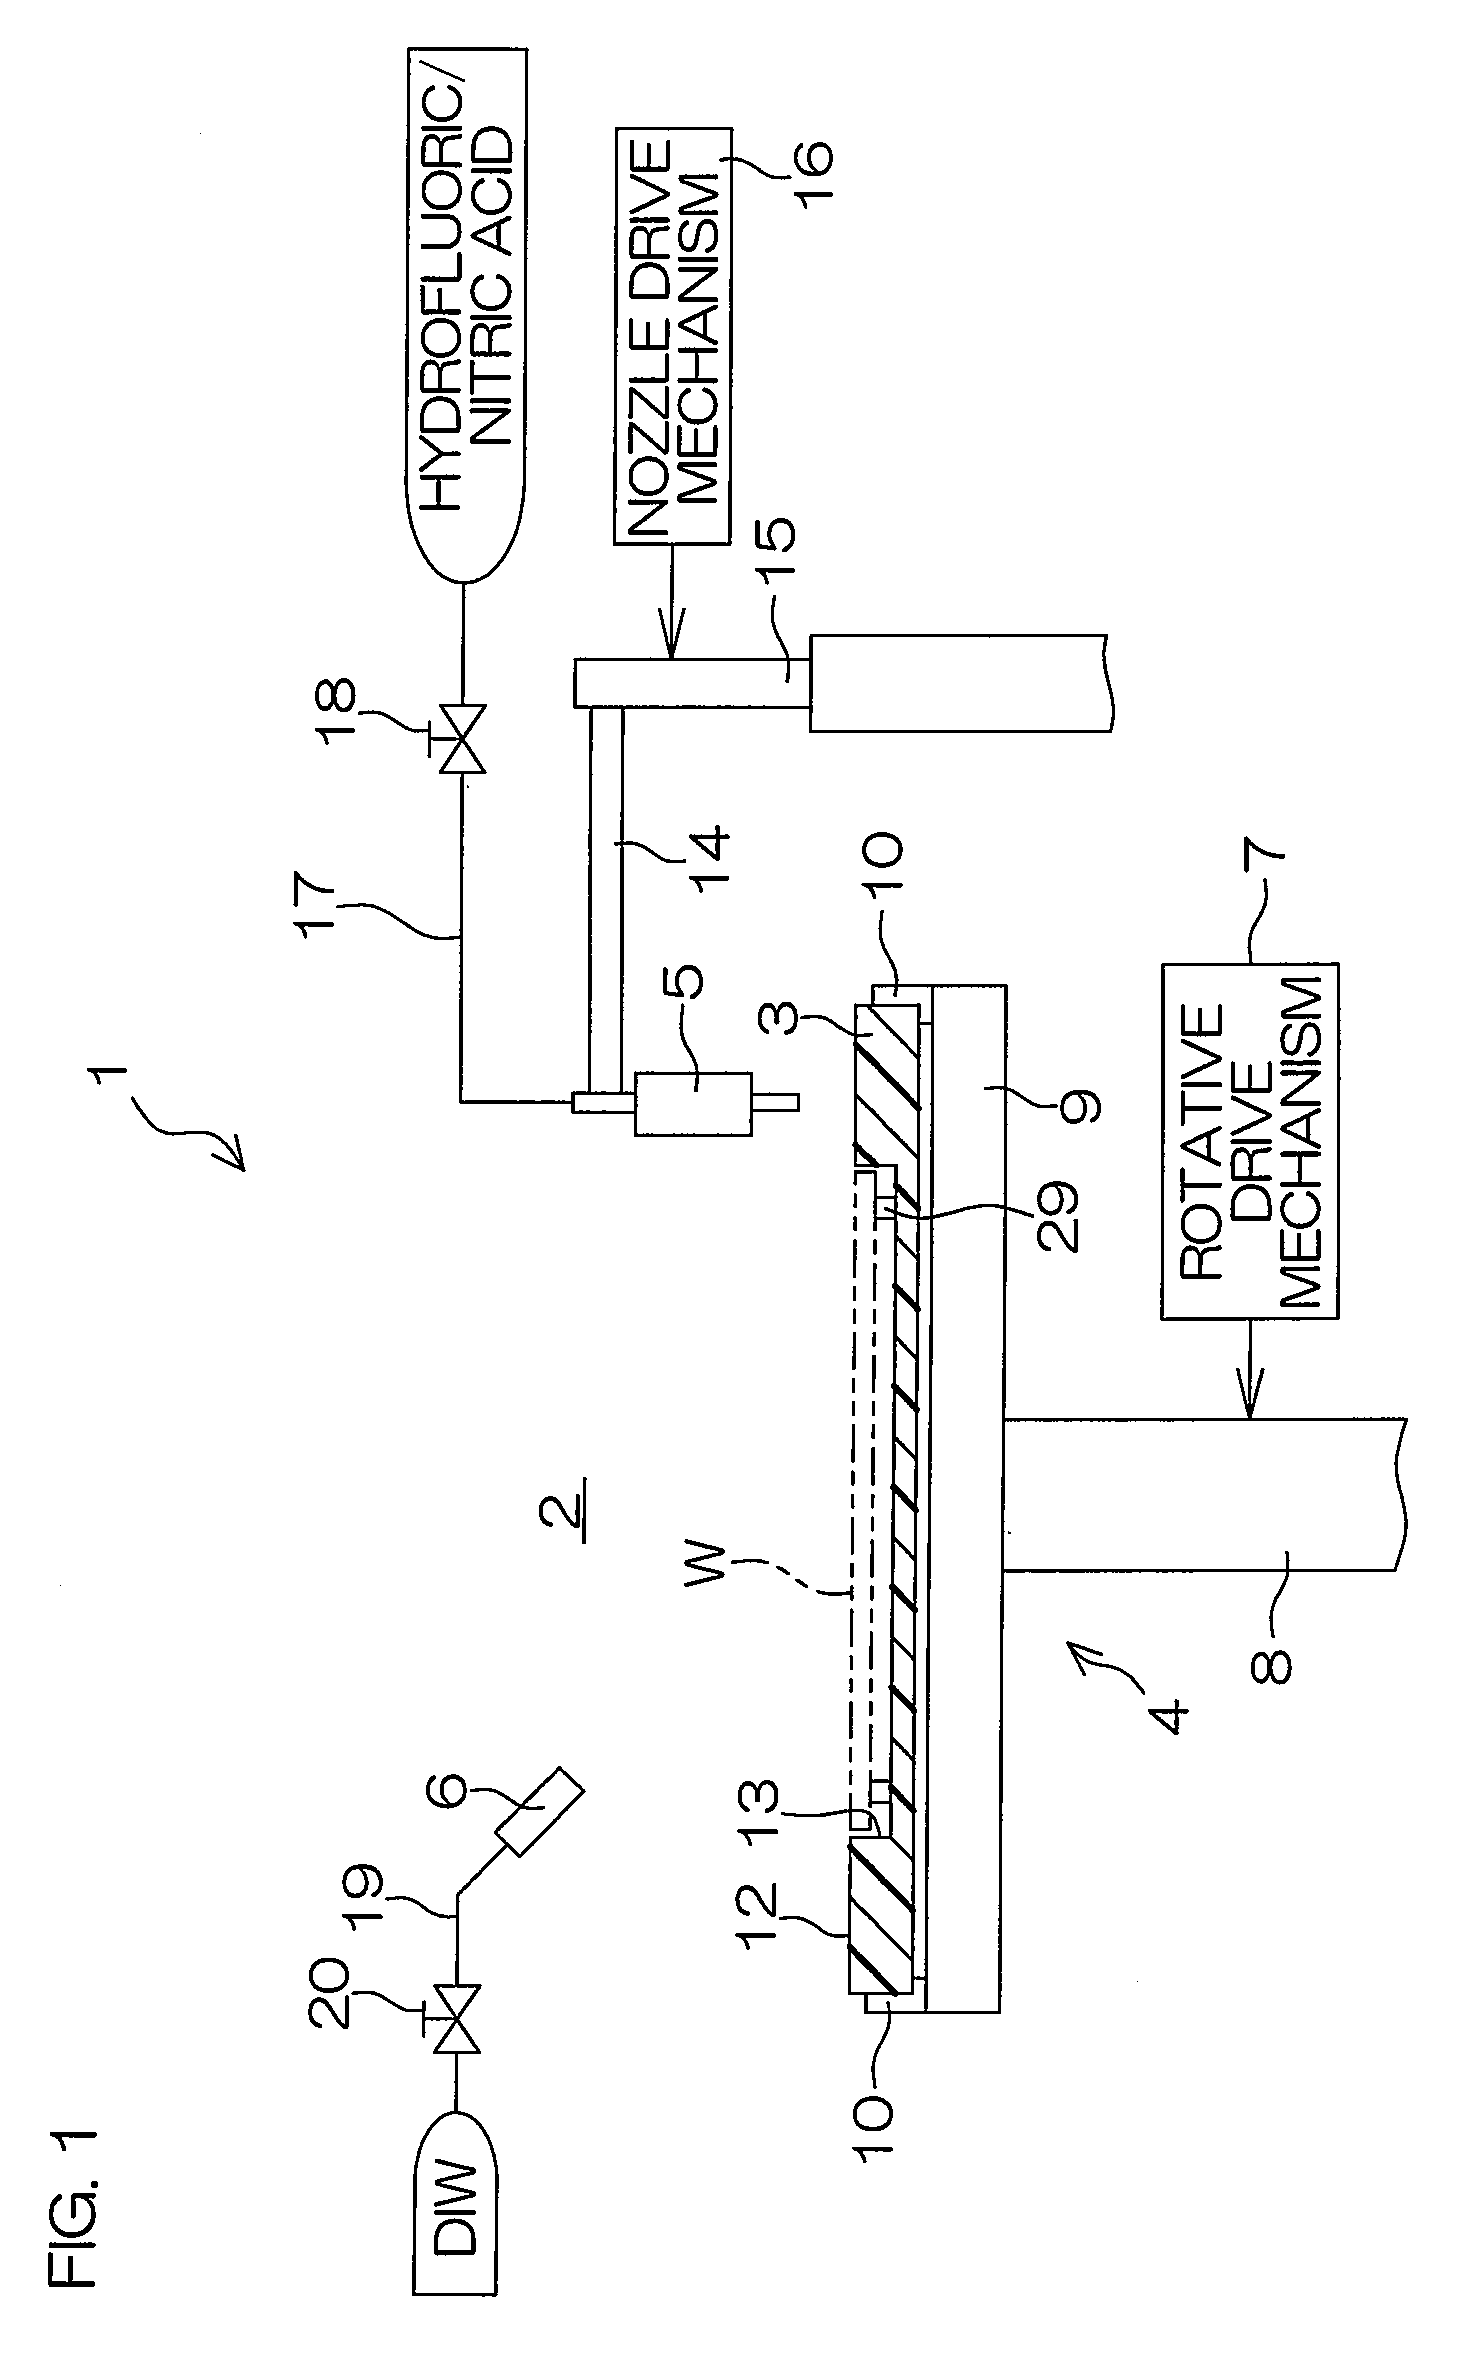 Substrate treatment apparatus, and substrate support to be used for the apparatus